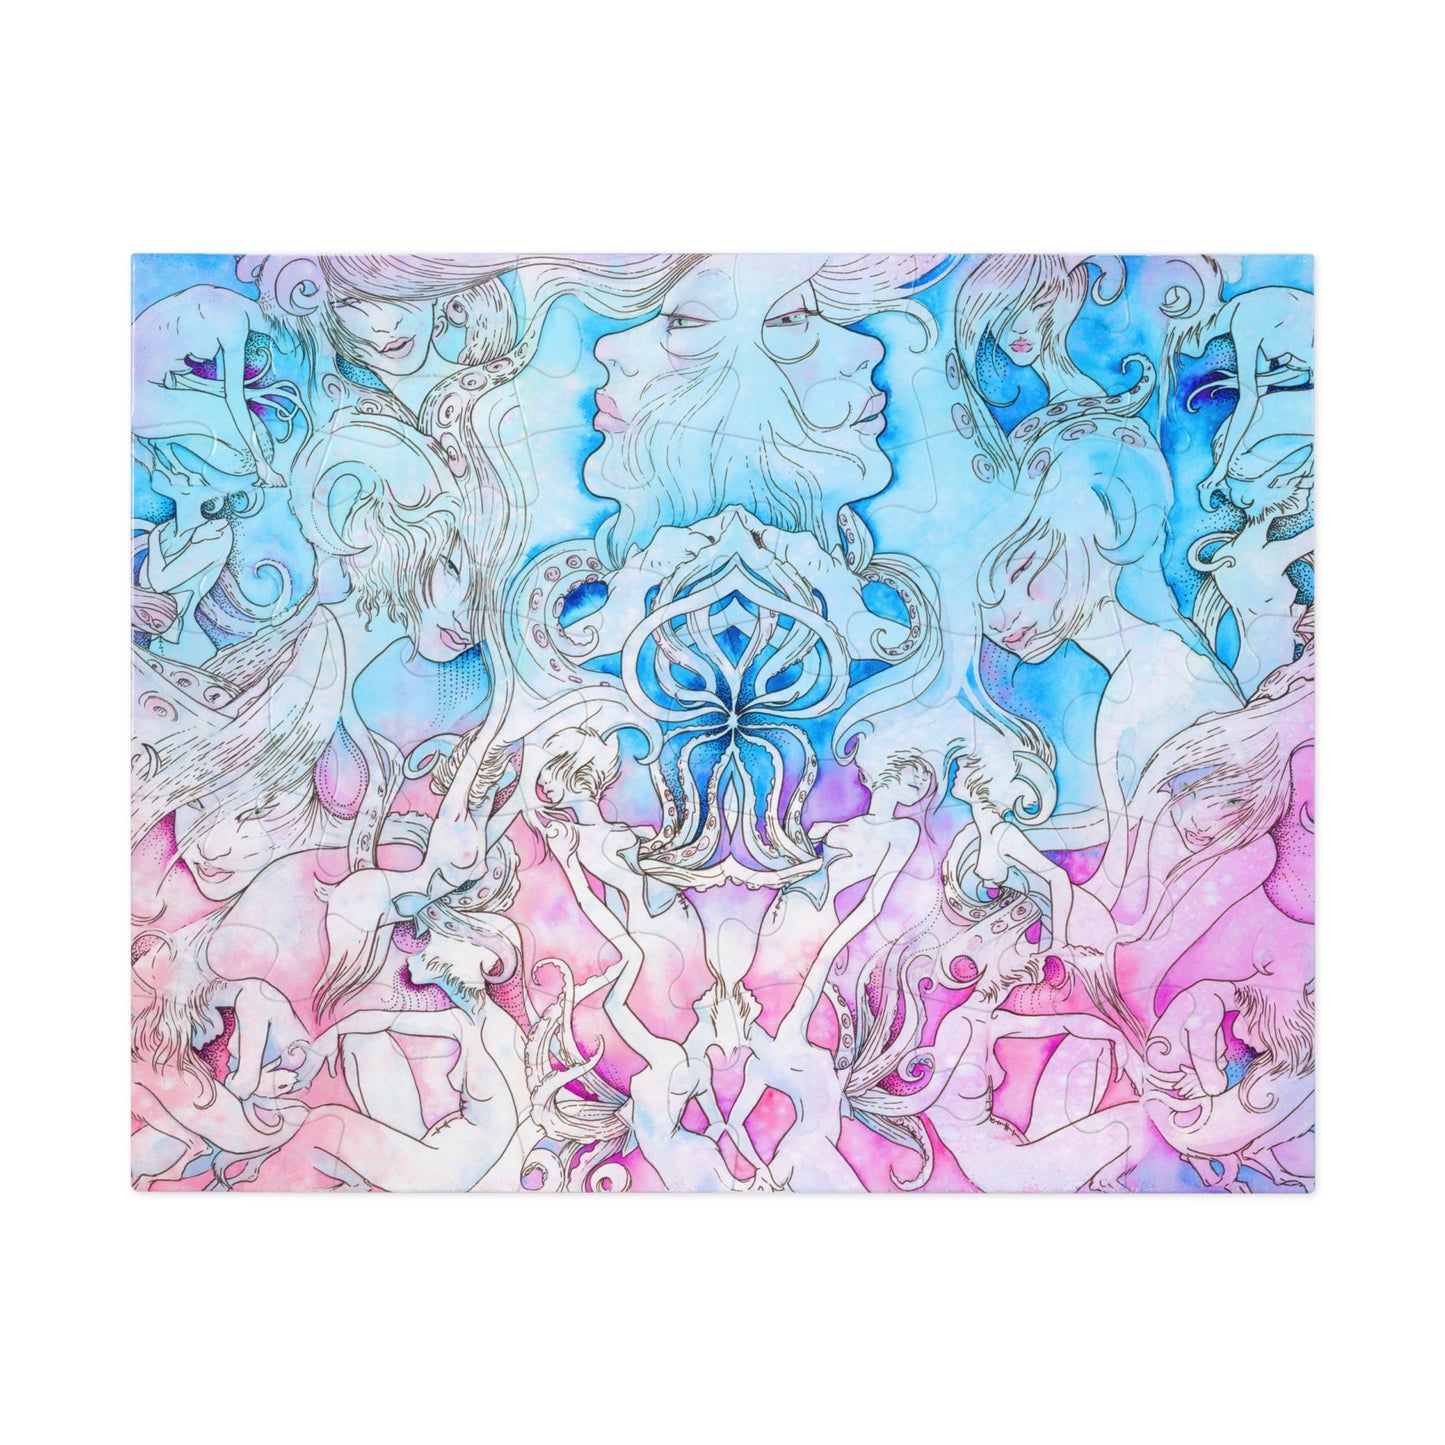 Birth Of Density Watercolor Art Jigsaw Puzzle